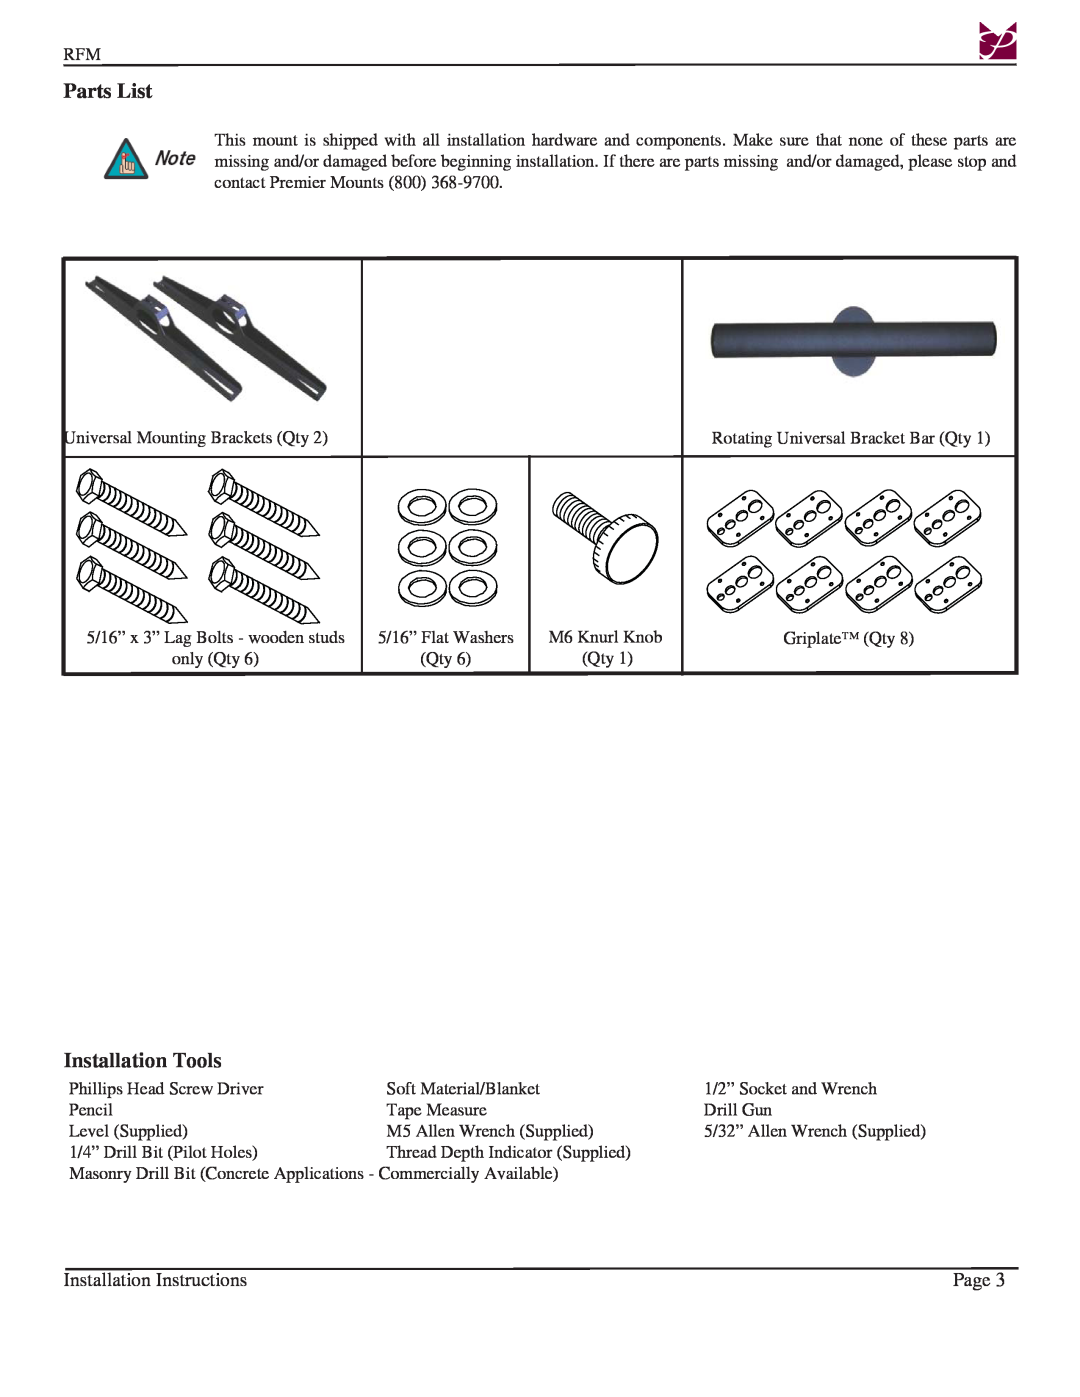 Premier Mounts Rotary series, RFM installation instructions Parts List, Installation Tools, Installation Instructions, Page 